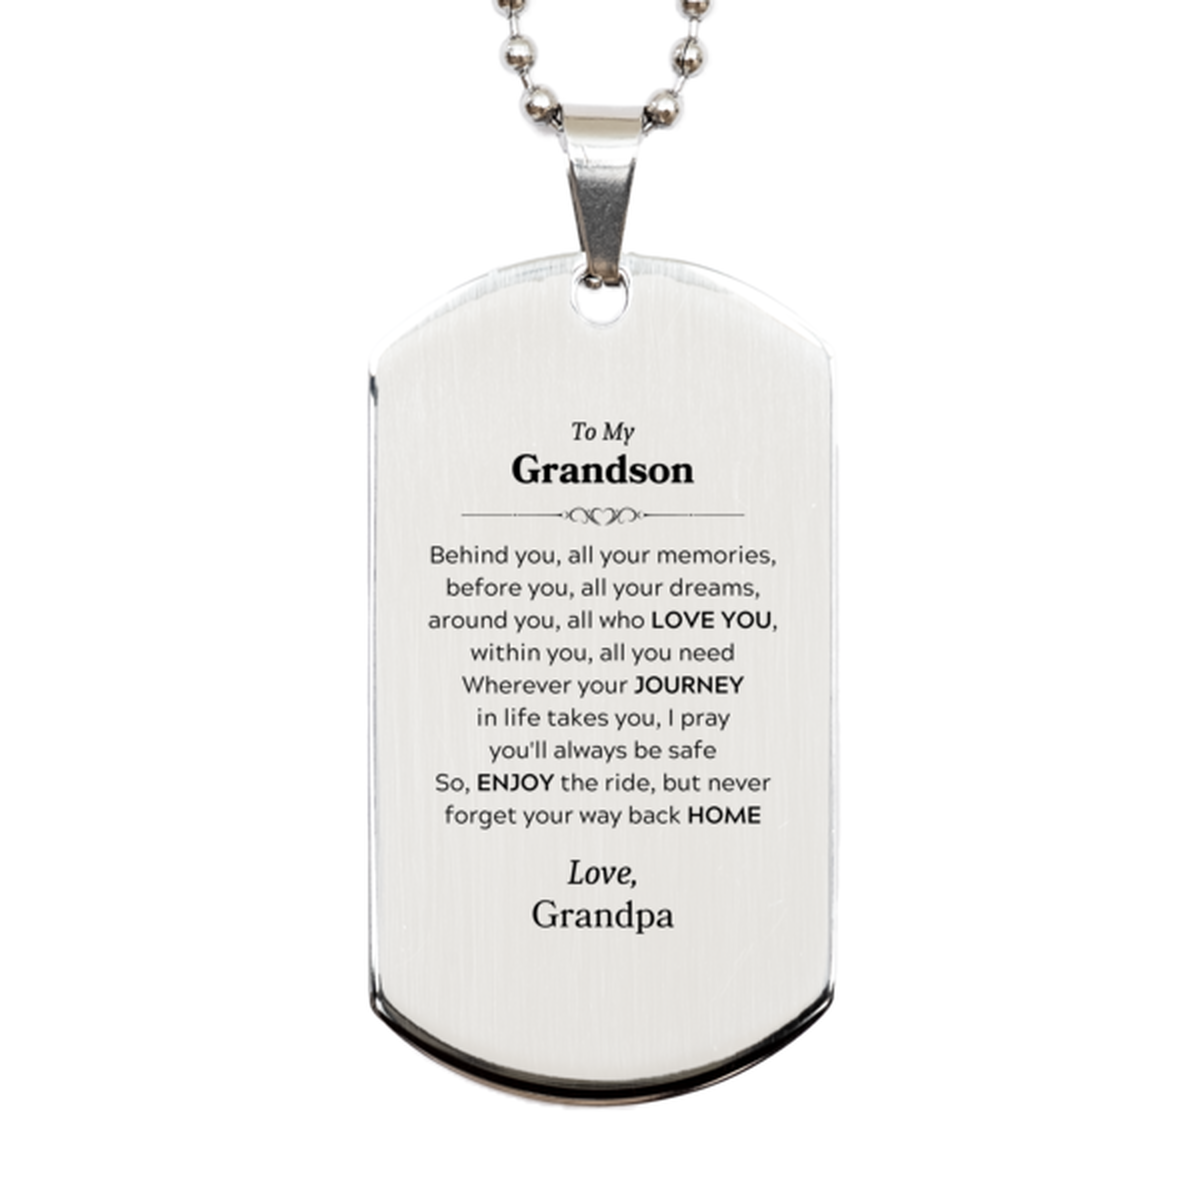 To My Grandson Graduation Gifts from Grandpa, Grandson Silver Dog Tag Christmas Birthday Gifts for Grandson Behind you, all your memories, before you, all your dreams. Love, Grandpa